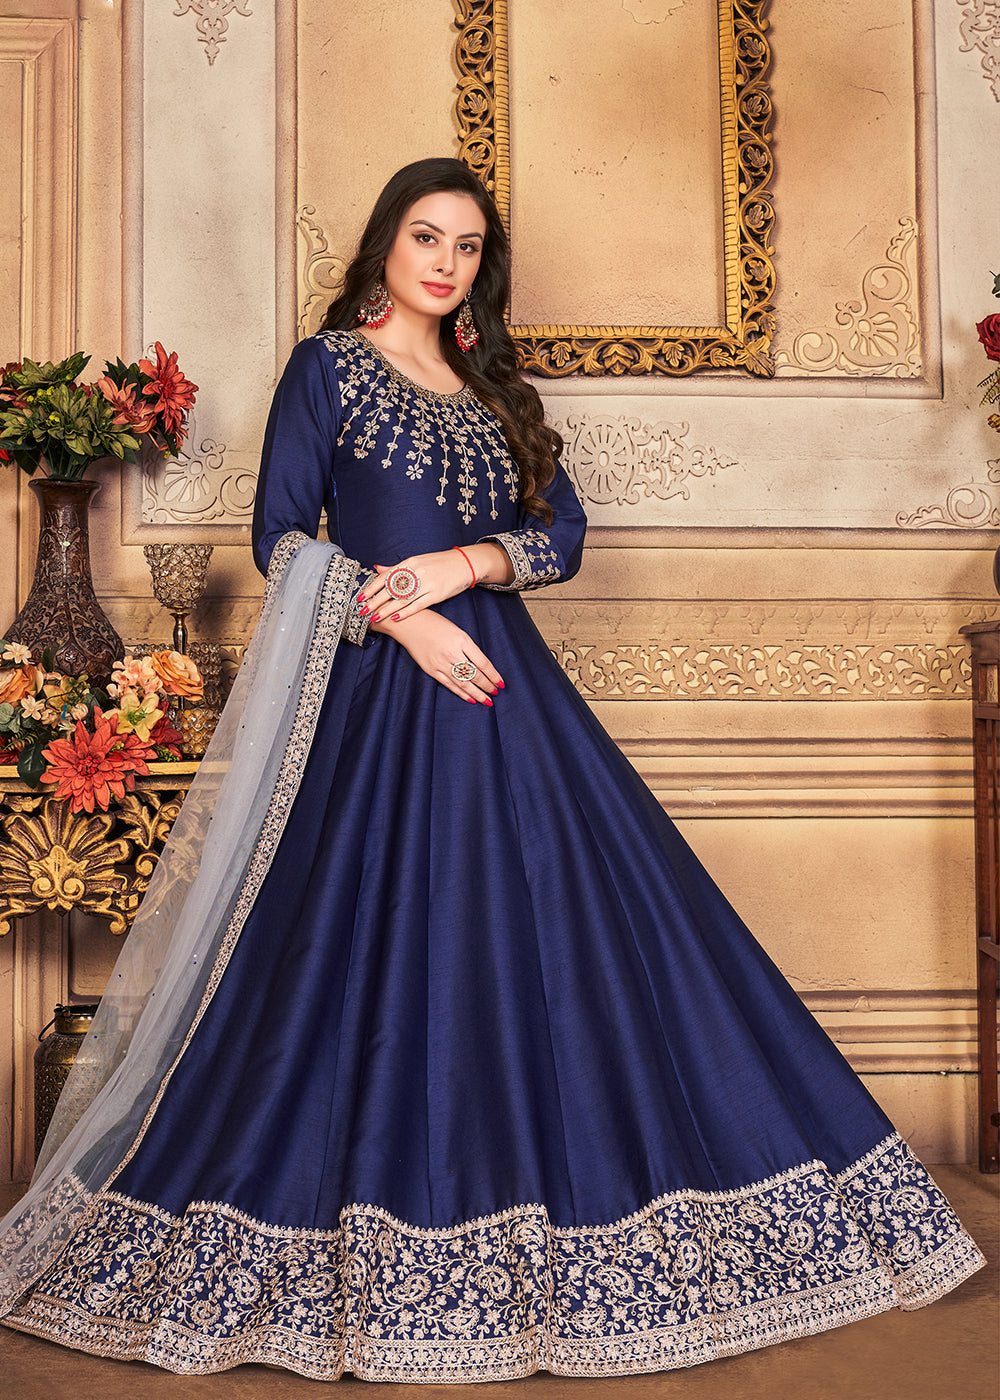 Buy Now Festive Enticing Blue Embroidered Silk Anarkali Suit Online in Canada at Empress Clothing.